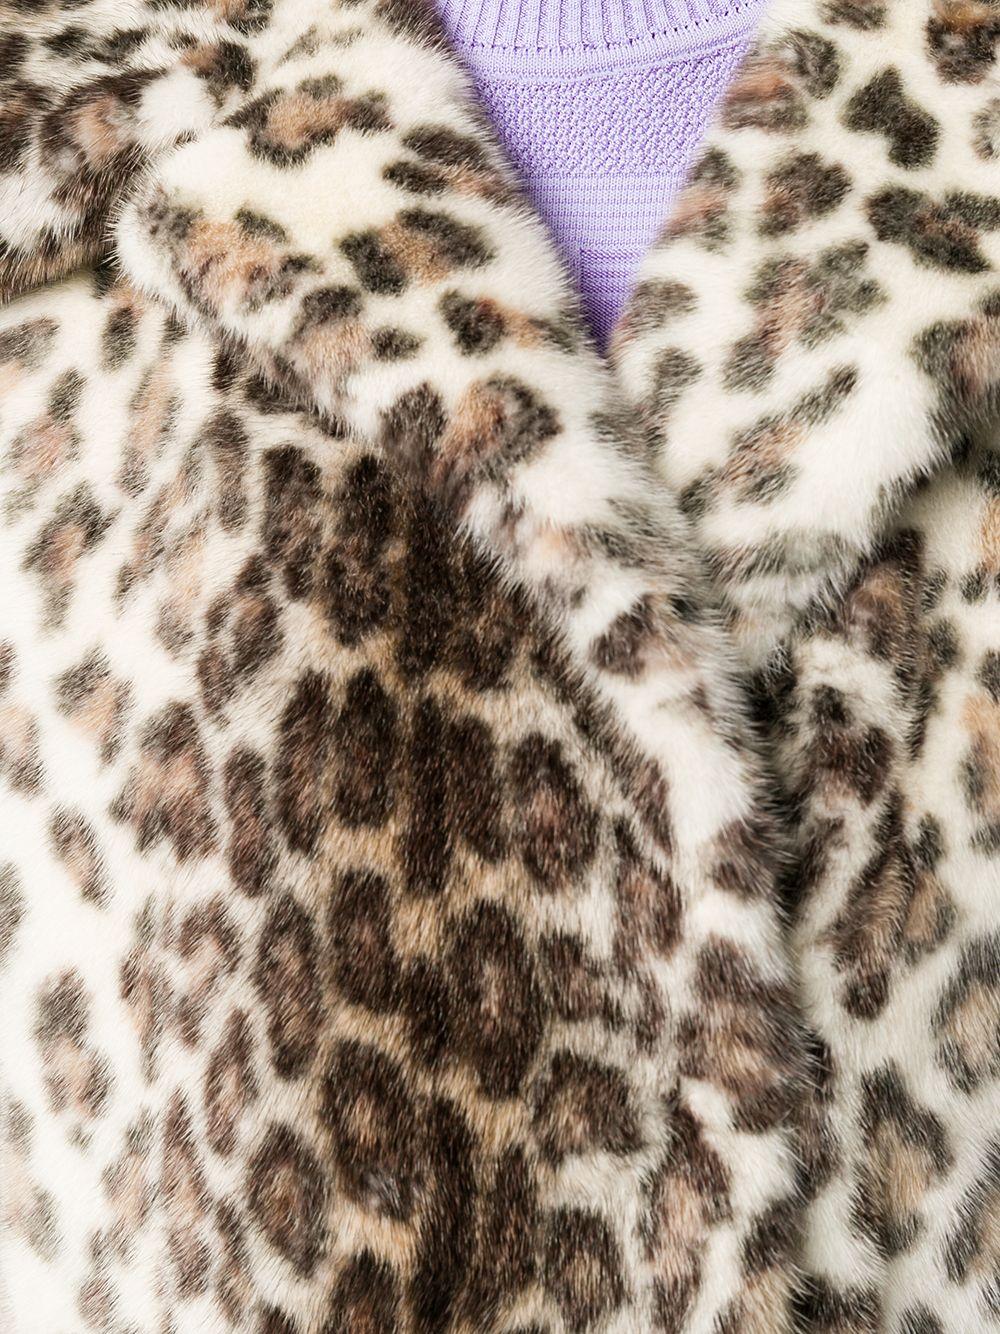 Crafted in France from pure mink, this pre-owned, 1920's inspired, fur coat by Christian Dior features a shift silhouette, a distinctive leopard print exterior, three-quarter length sleeves and a concealed front hook fastening. Falling just below